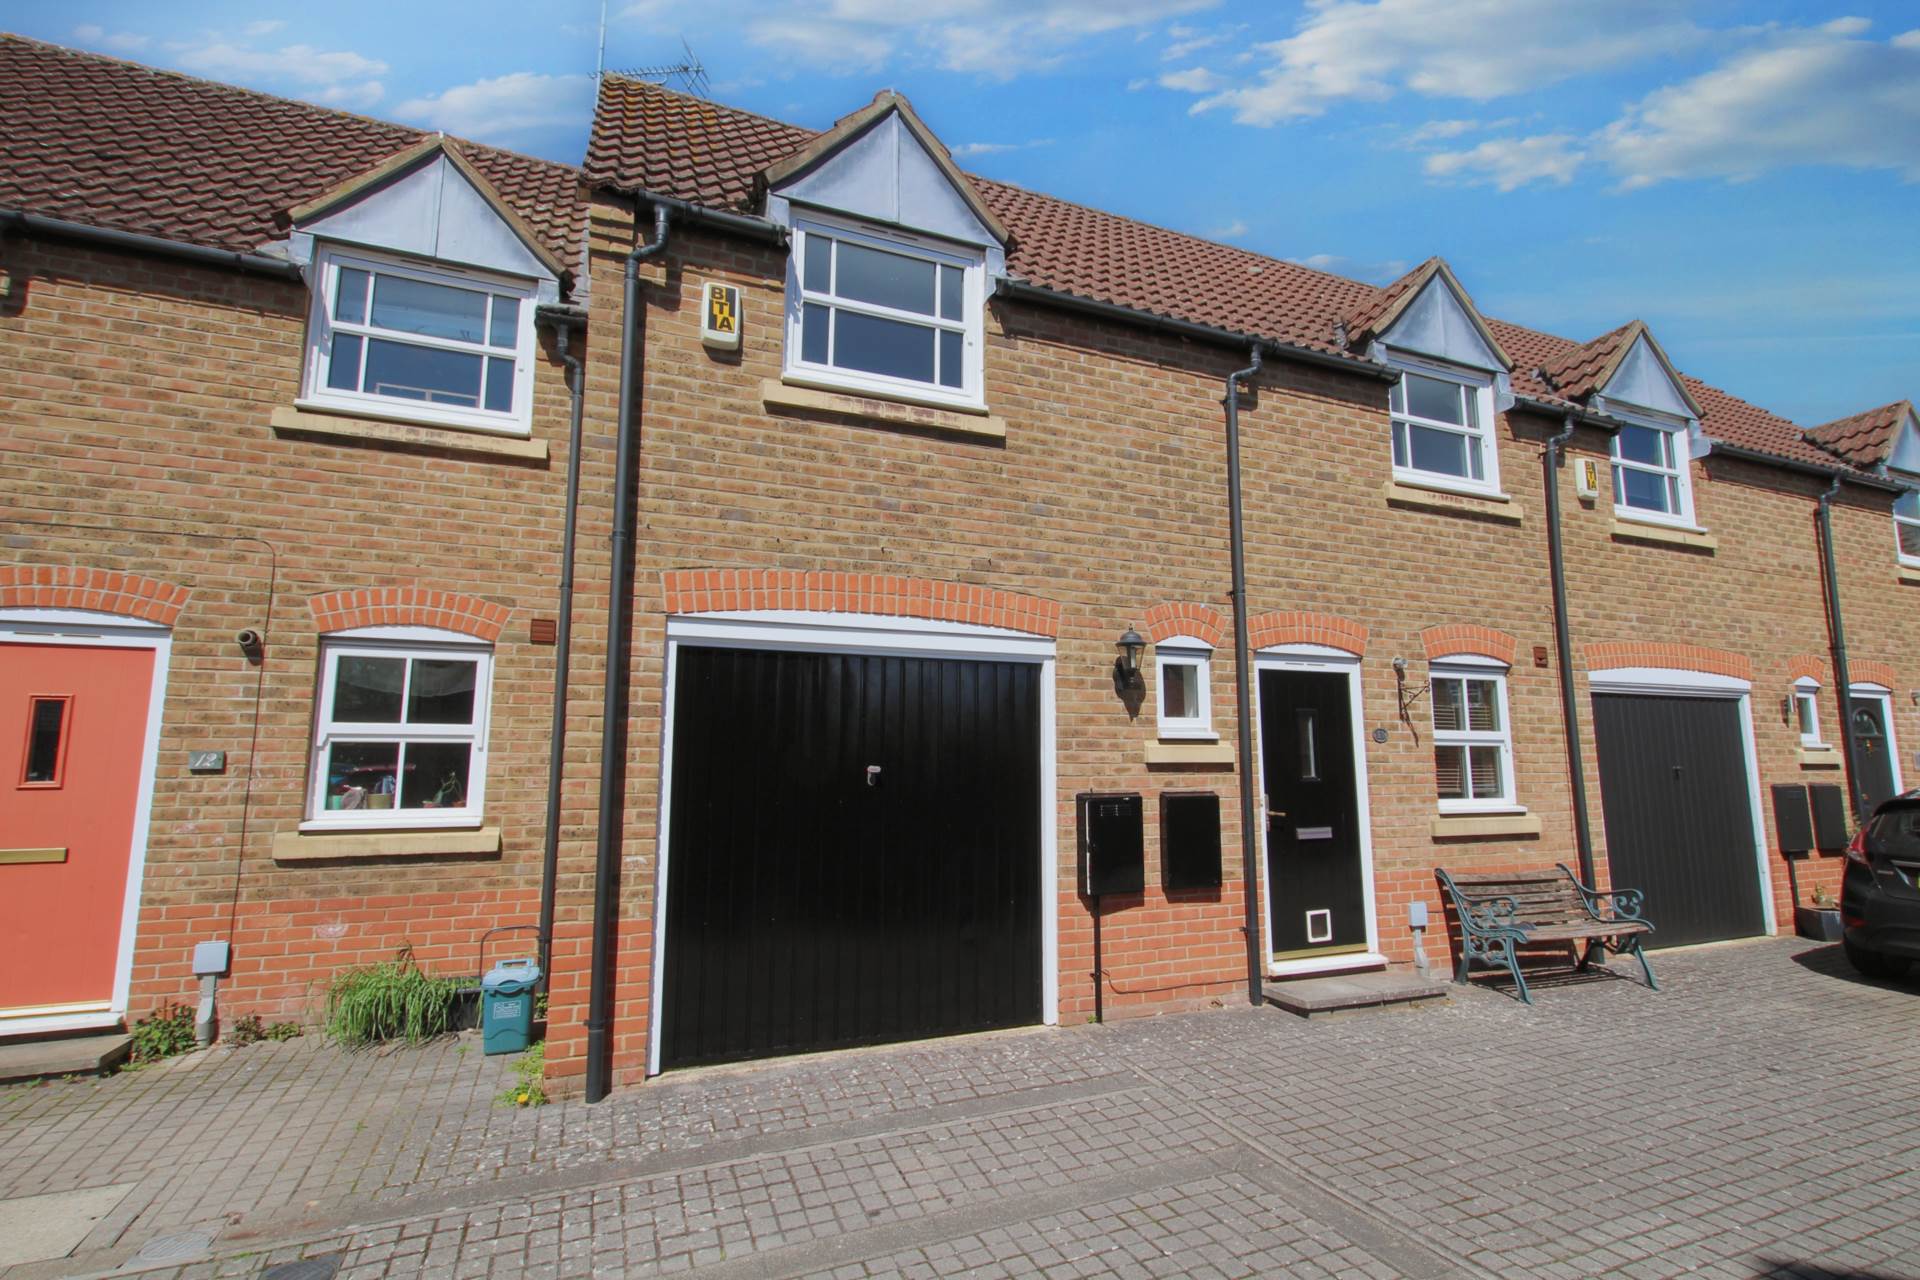 3 bed Mid Terraced House for rent in Aylesbury. From Mortimers